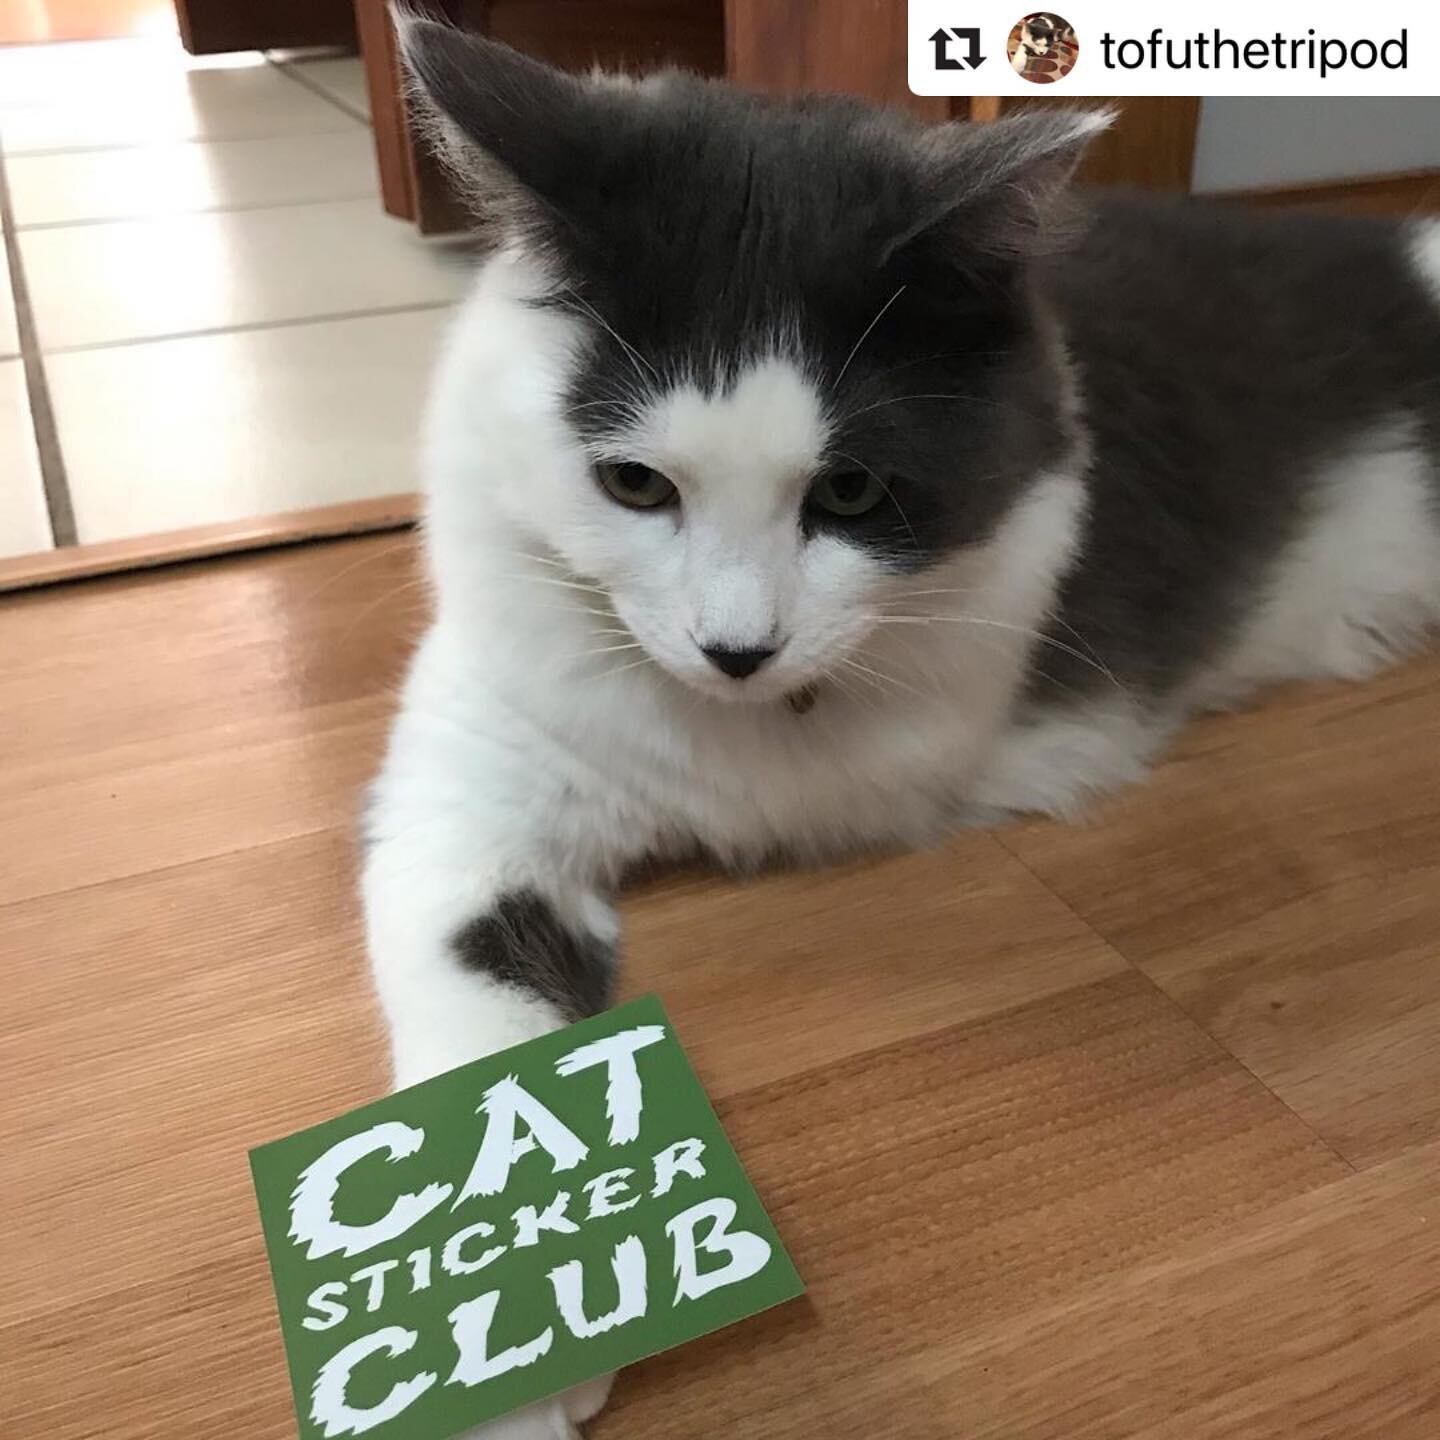 #Repost @tofuthetripod with @make_repost
・・・
I am a proud member of the @cat_sticker_club and received my first sticker this week! So fun! 😻 #tofuthetripod #catsofinstagram #catstickerclub